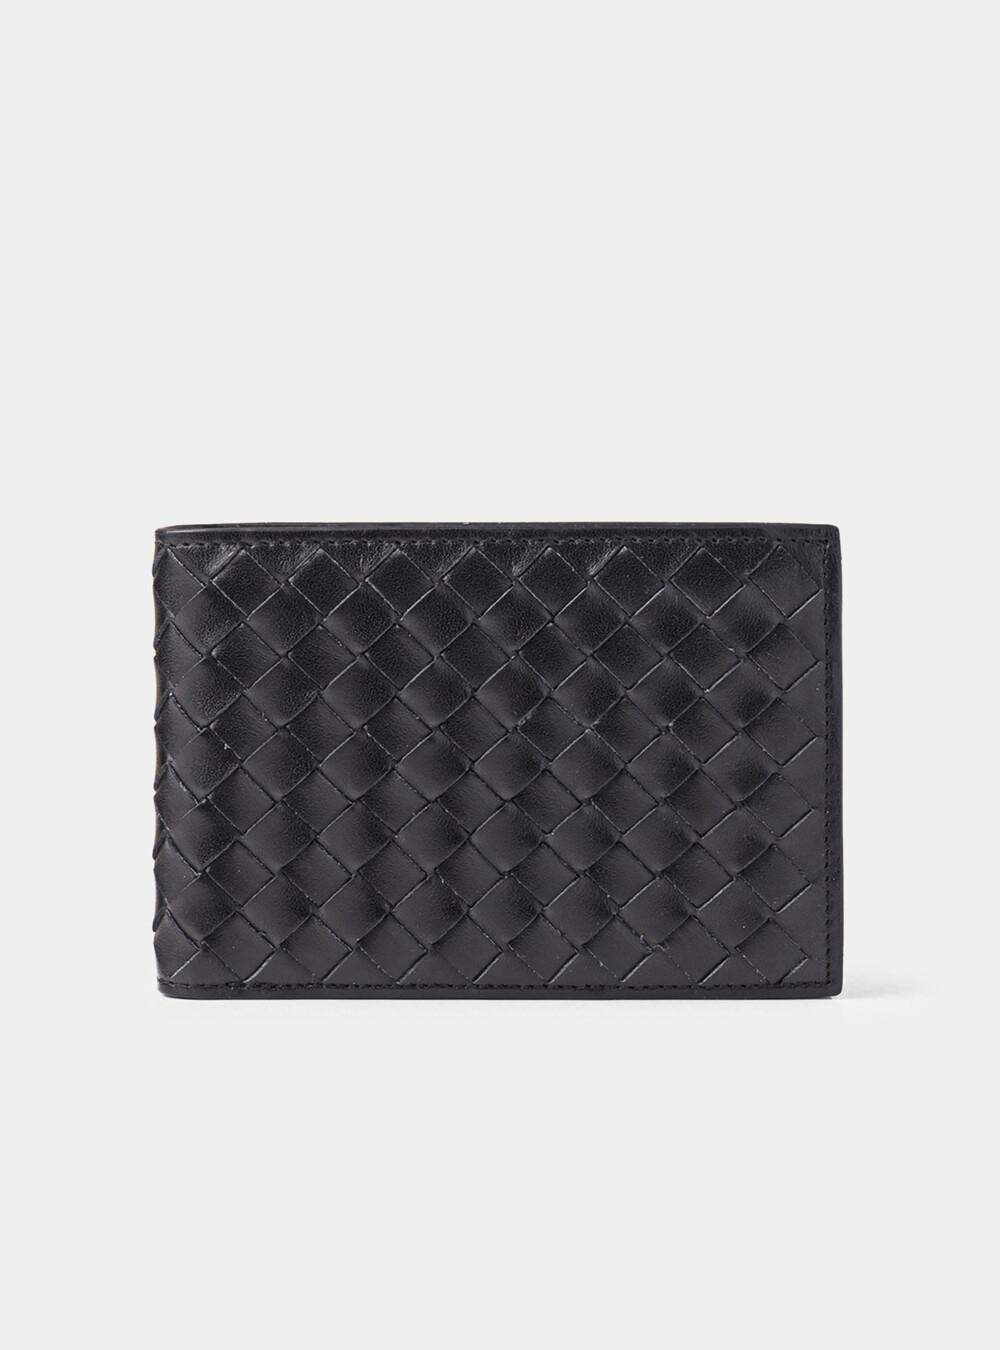 Braided leather wallet | GutteridgeEU | Men's Bags and Backpack